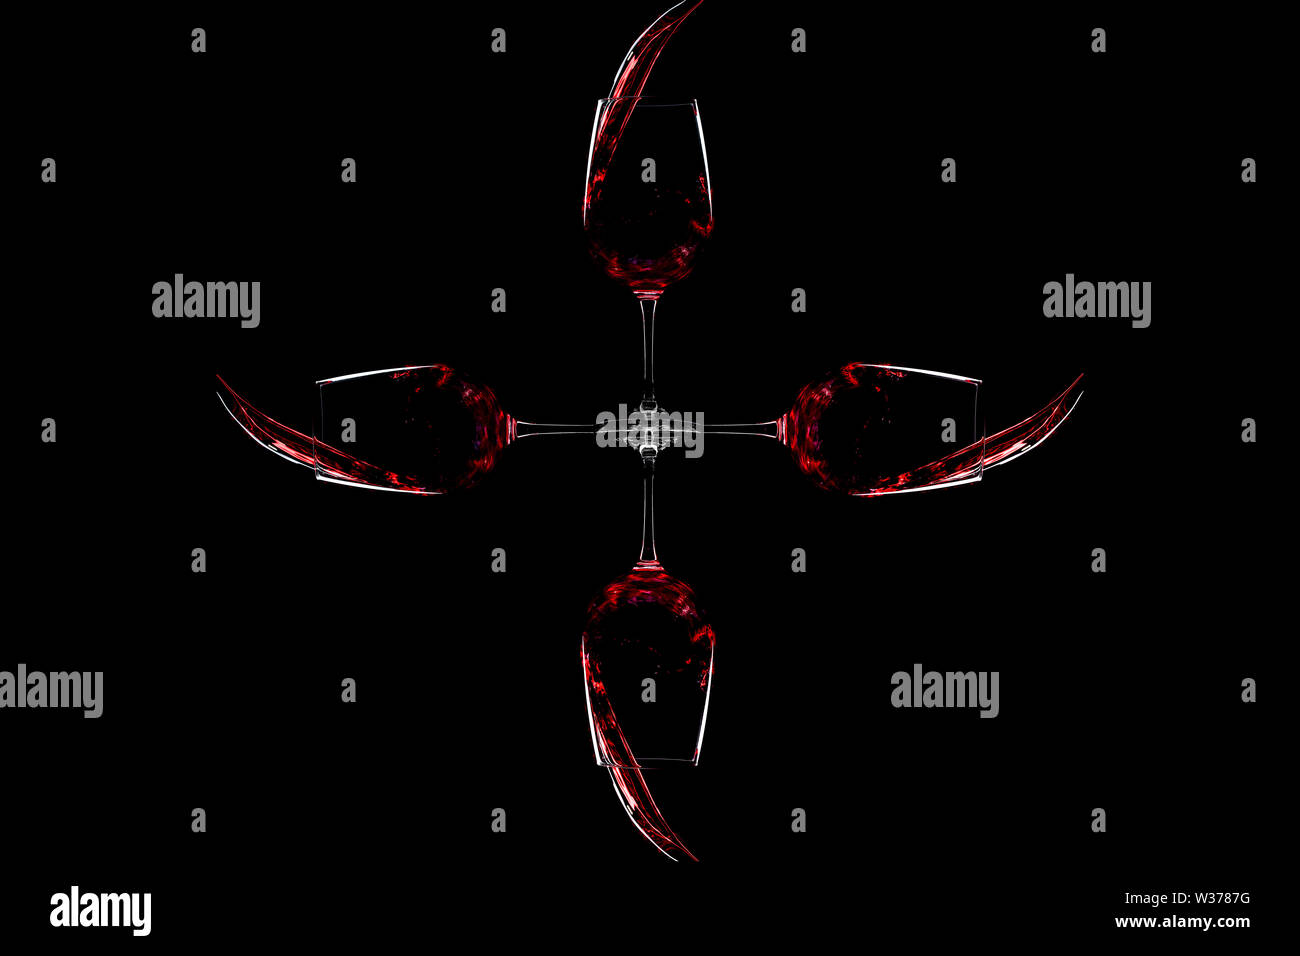 glasses of red wine spill over black background Stock Photo